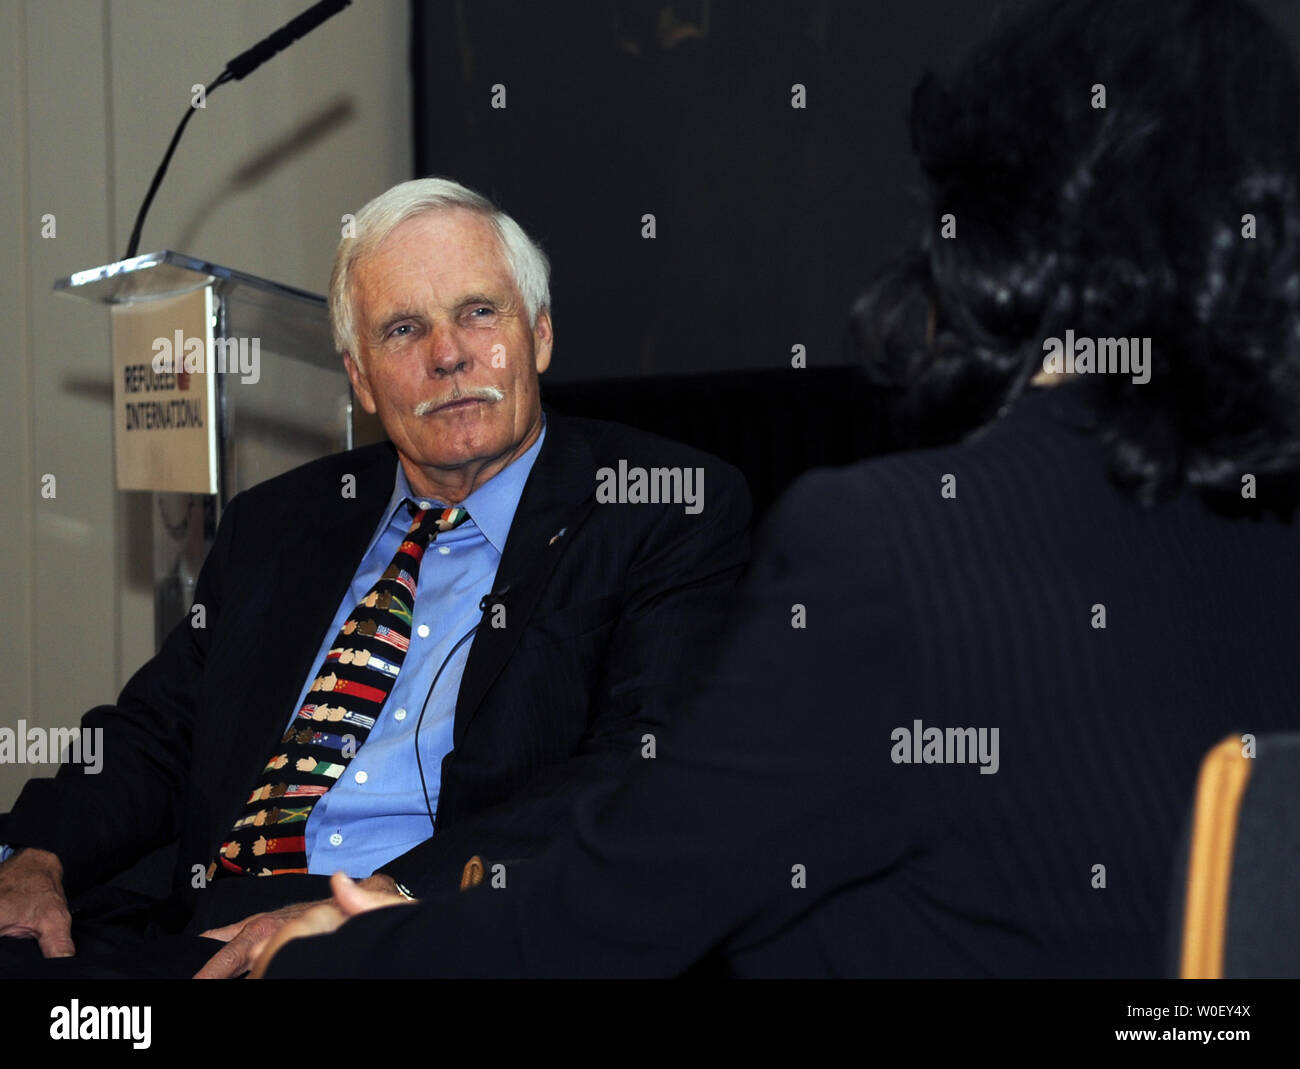 CNN Chief International Correspondent Christiane Amanpour (R) interviews Ted Turner at the 30th Anniversary Refugees International dinner at the Embassy of Italy in Washington on May 7, 2009. The organization is honoring Ted Turner for his contributions to humanitarian issues. (UPI Photo/Alexis C. Glenn) Stock Photo